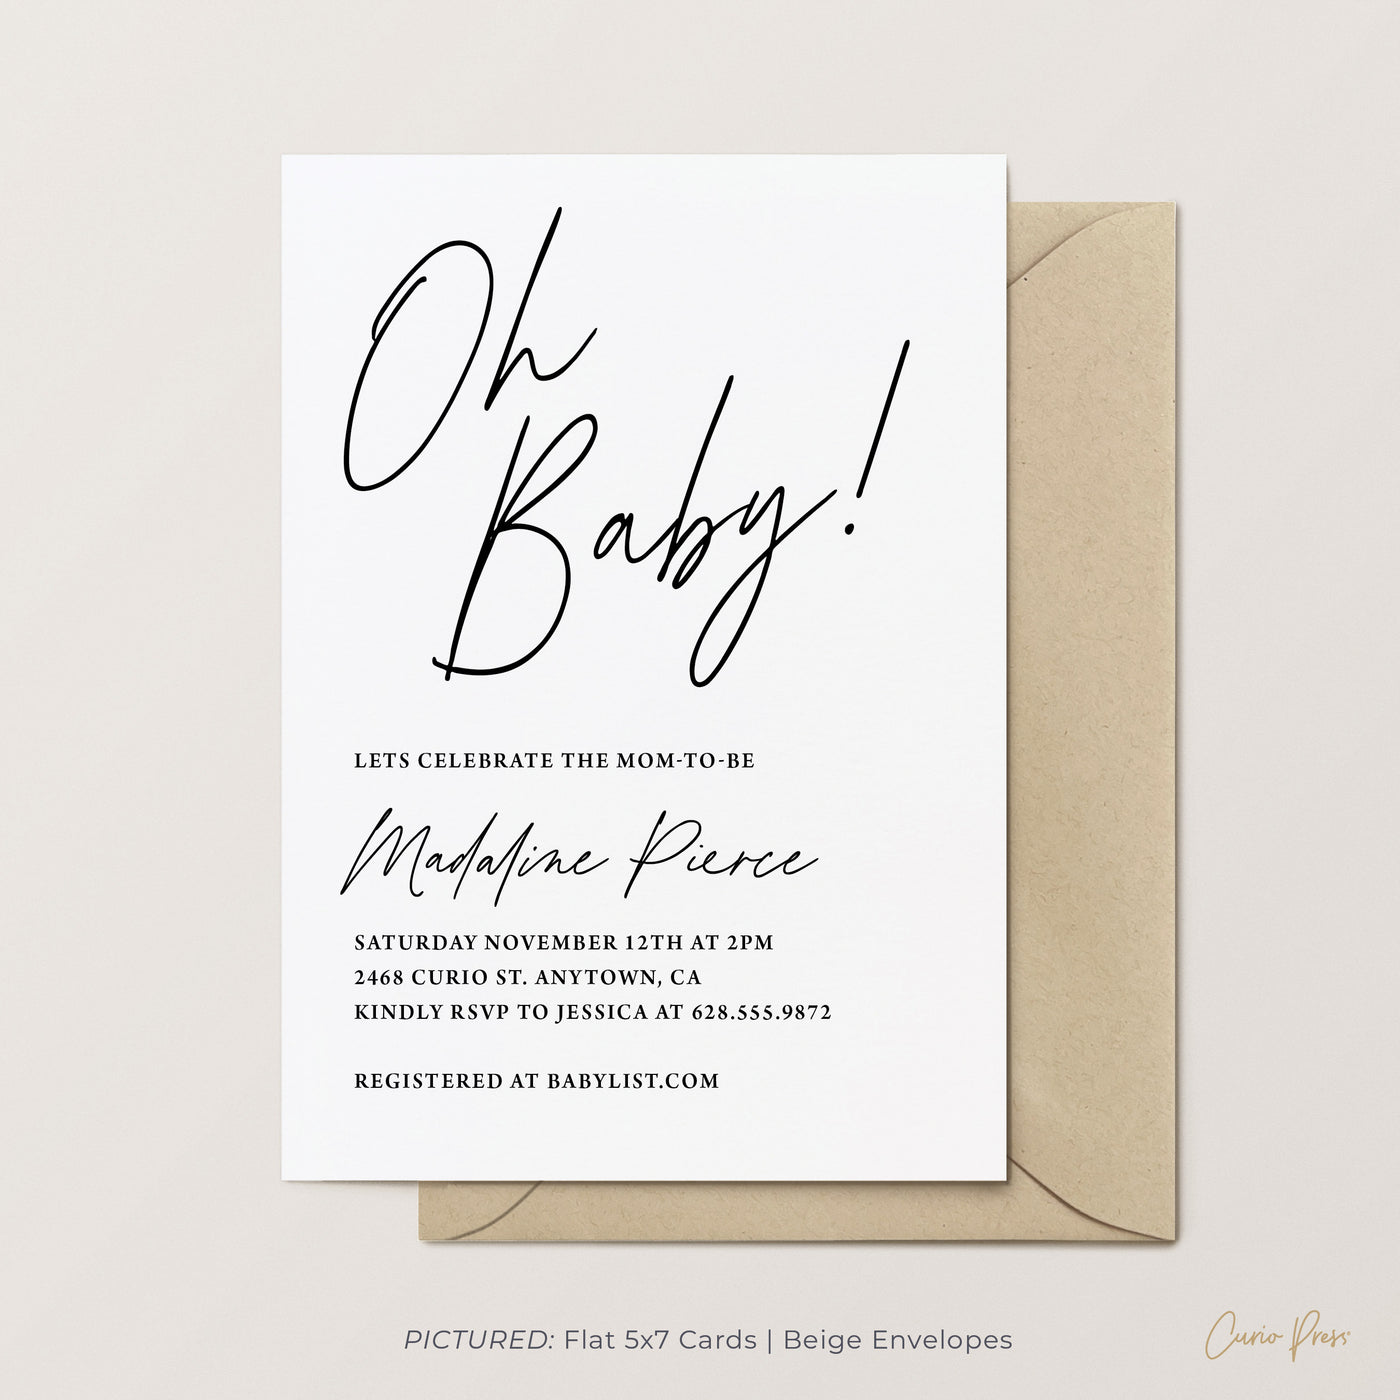 Oh Baby: Baby Shower Invitation Card Set